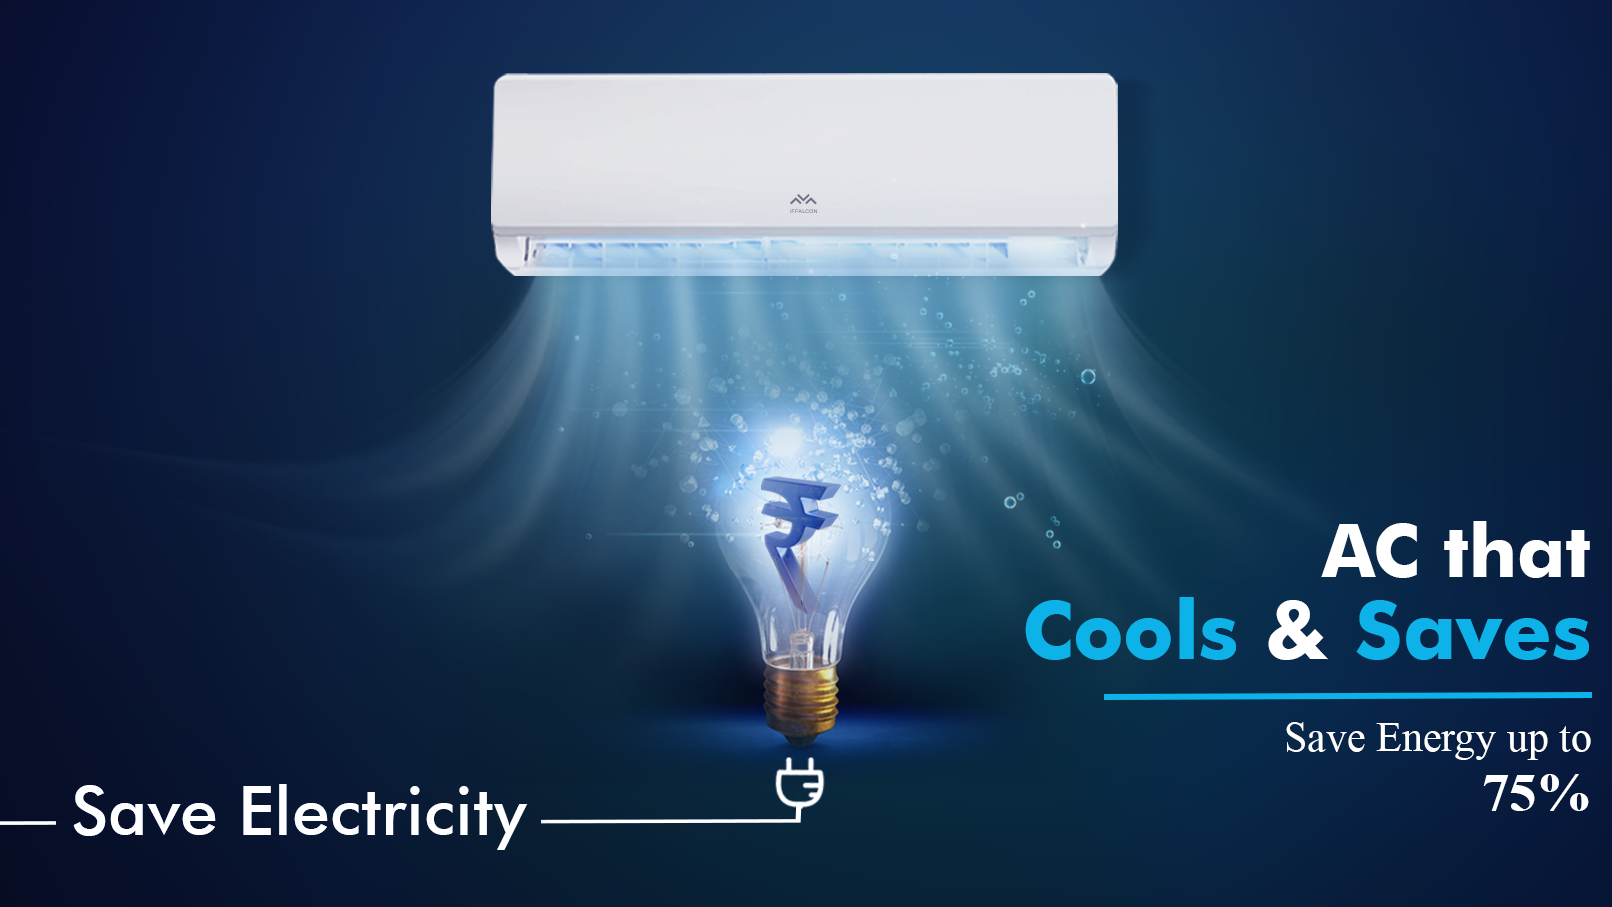 AI Ultra-Inverter Technology: AC that cools & Saves Enery upto 75%